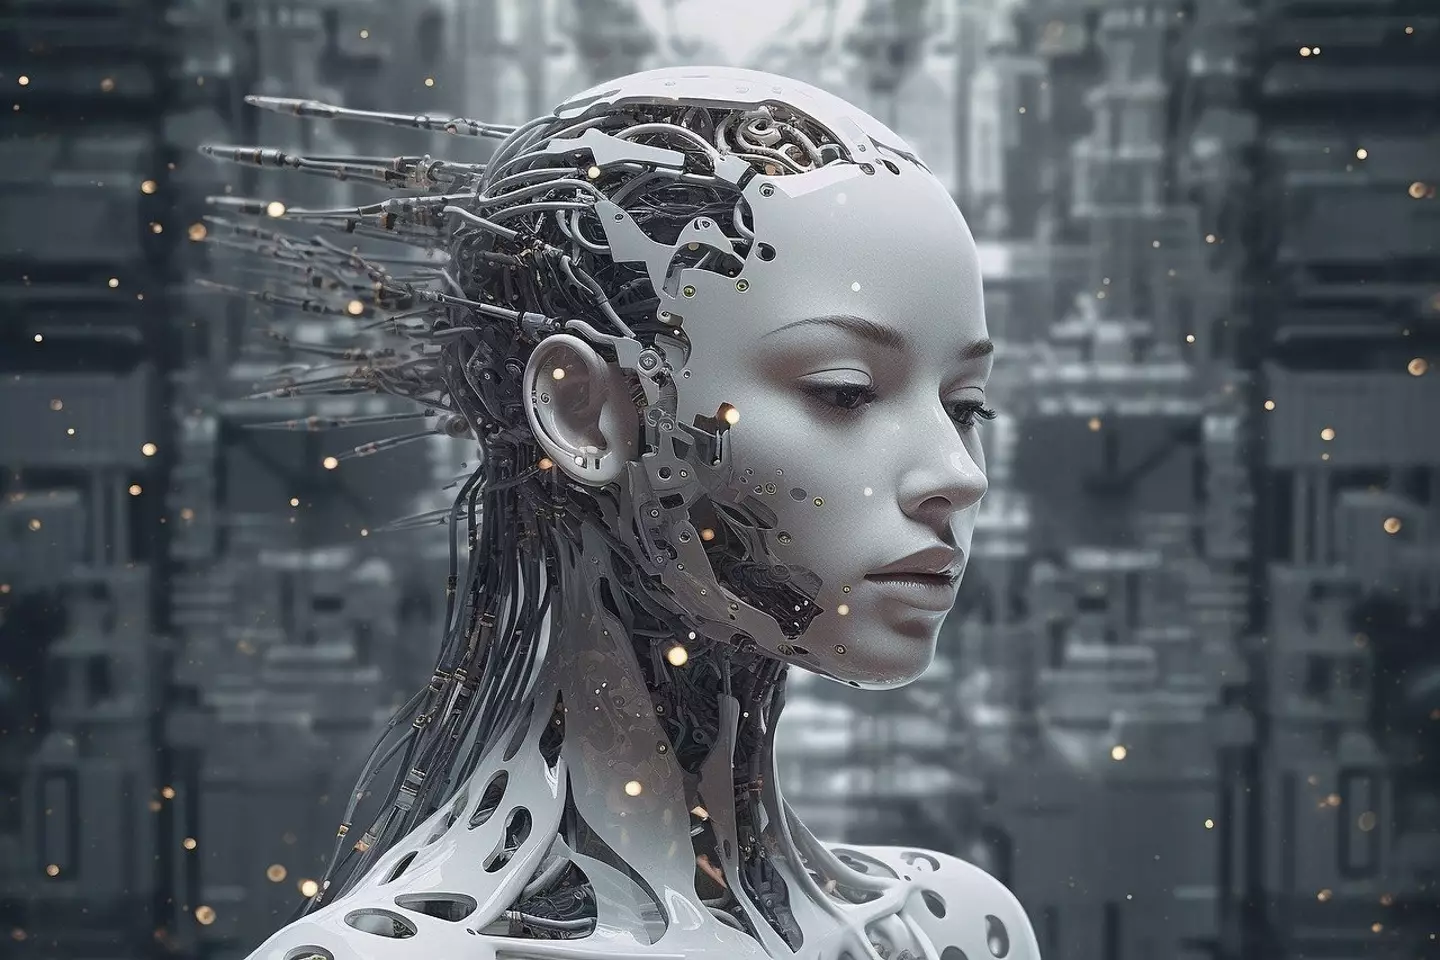 Could AI spark the downfall of this world?